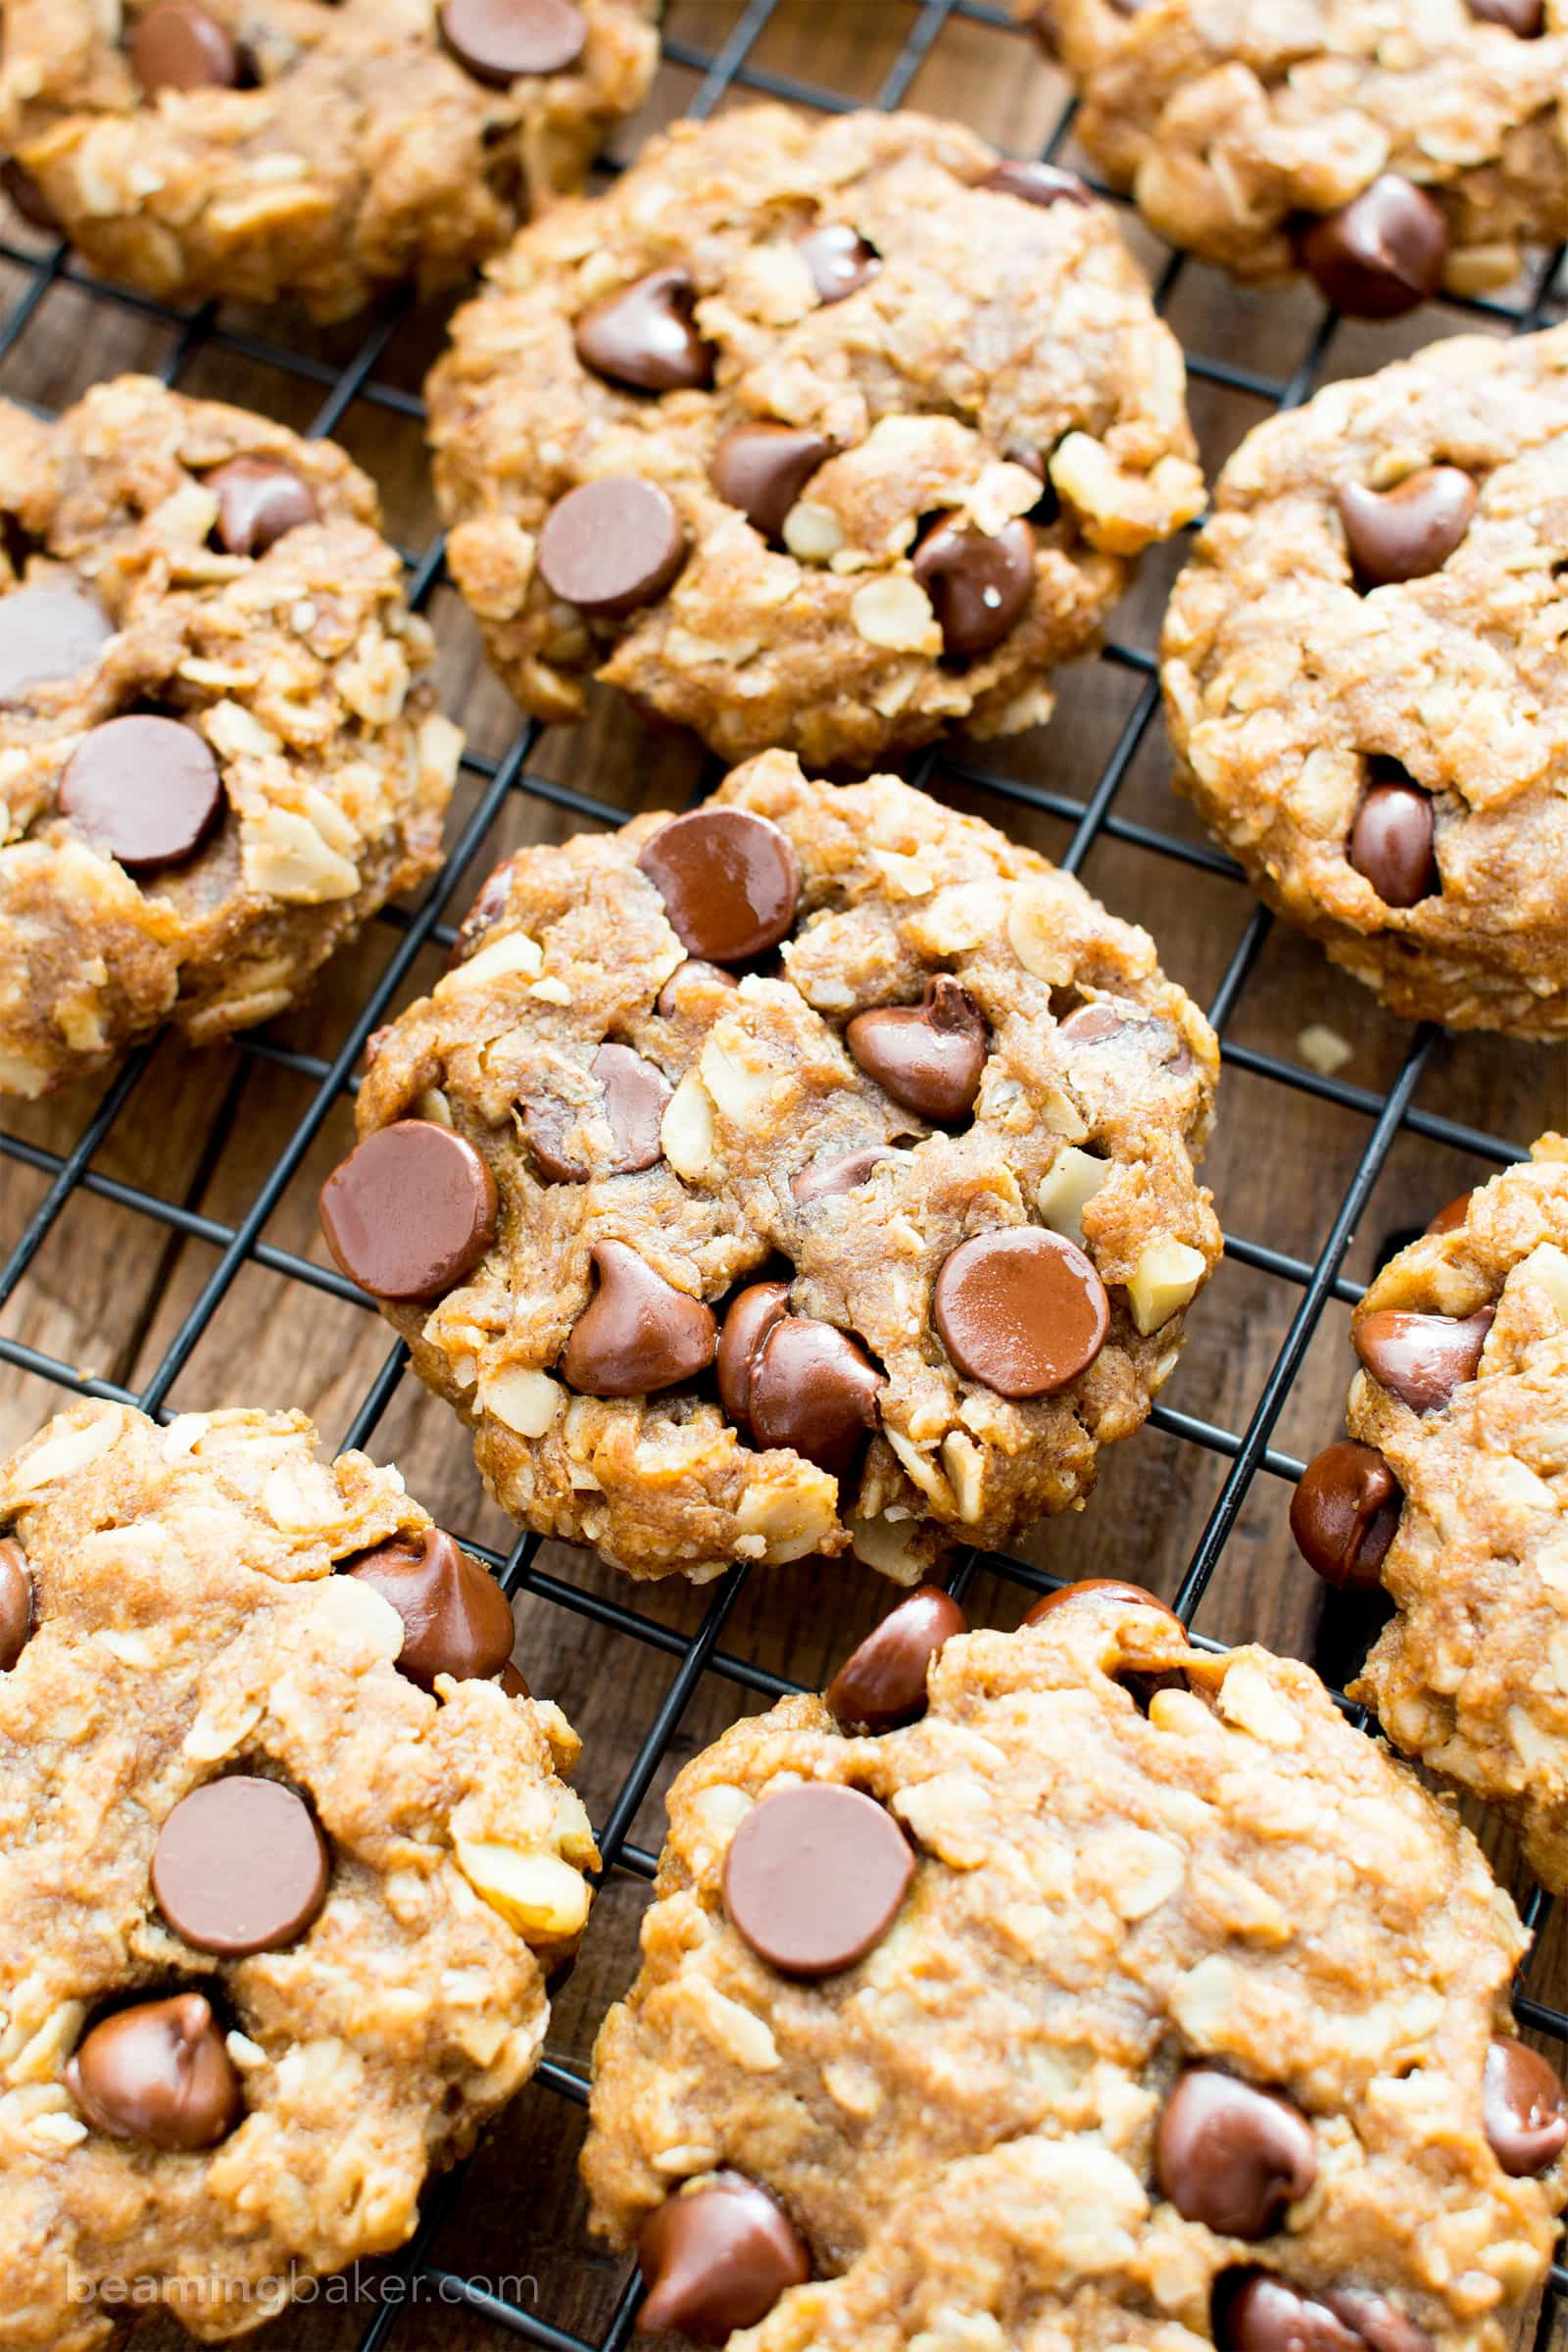 Chocolate Chip Peanut Butter Oatmeal Cookies
 Easy Gluten Free Peanut Butter Chocolate Chip Oatmeal